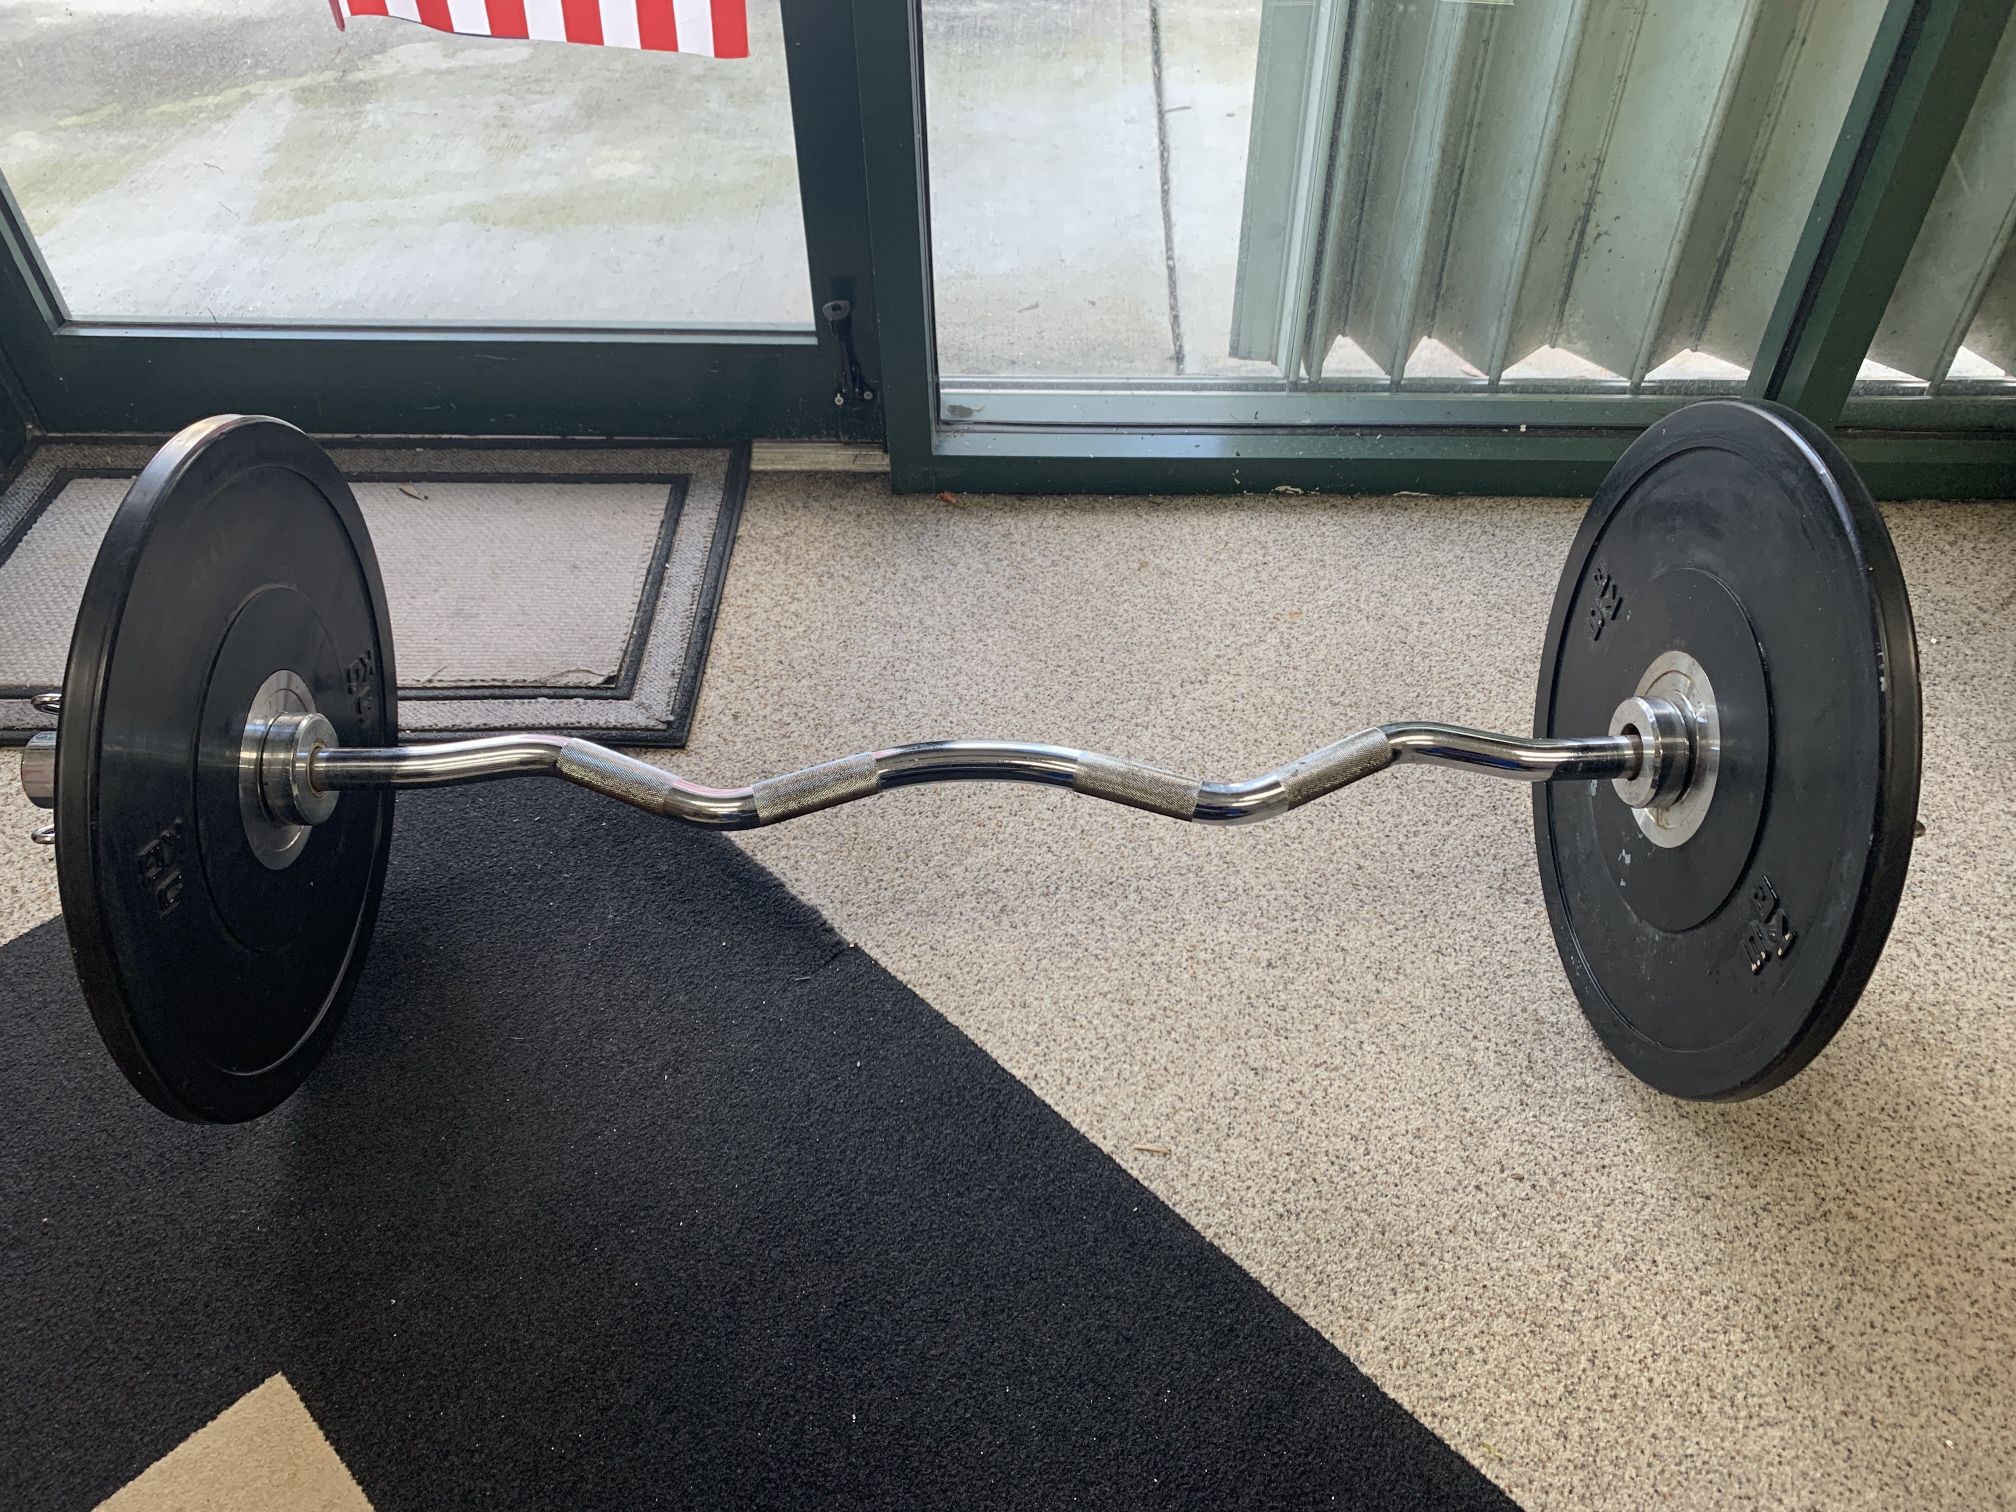 Olympic curl Bar 5 Pices